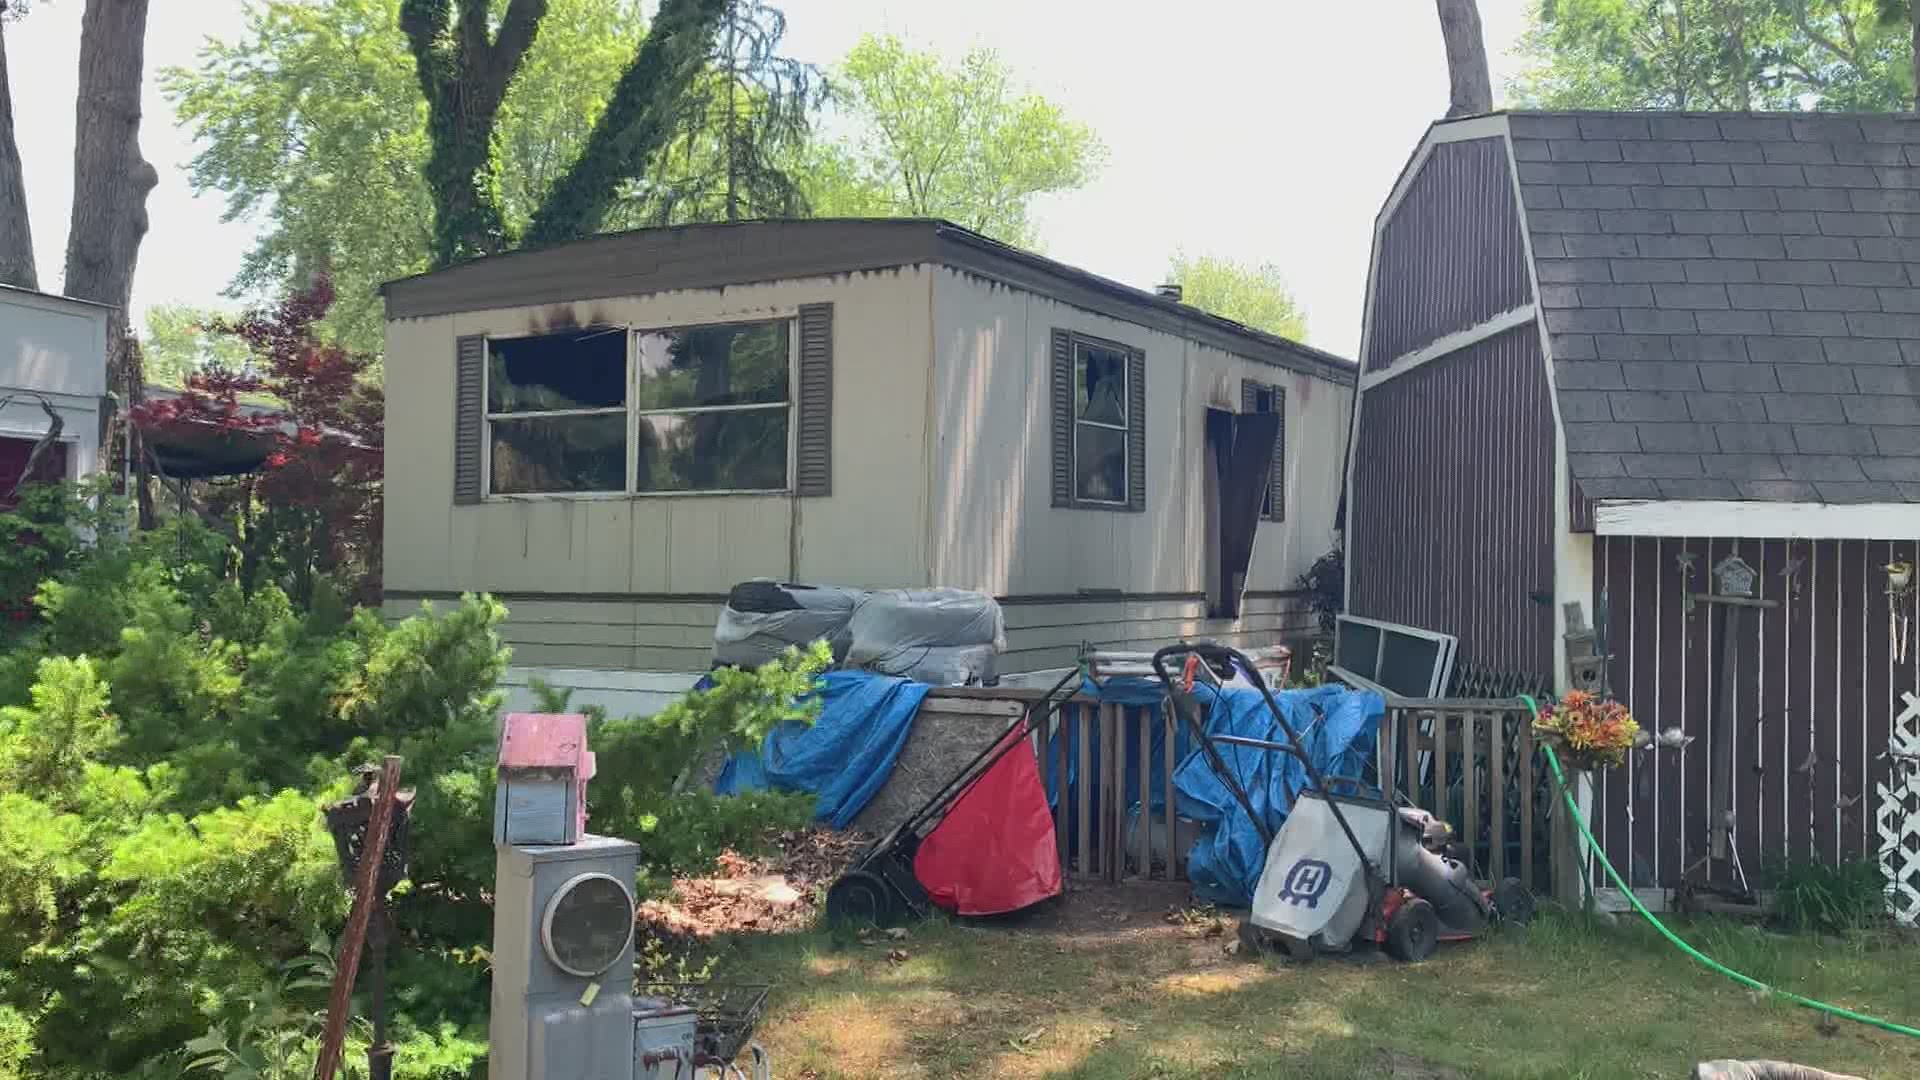 While the homeowner was able to make it out safely, two dogs did not make it out of the home, police say.